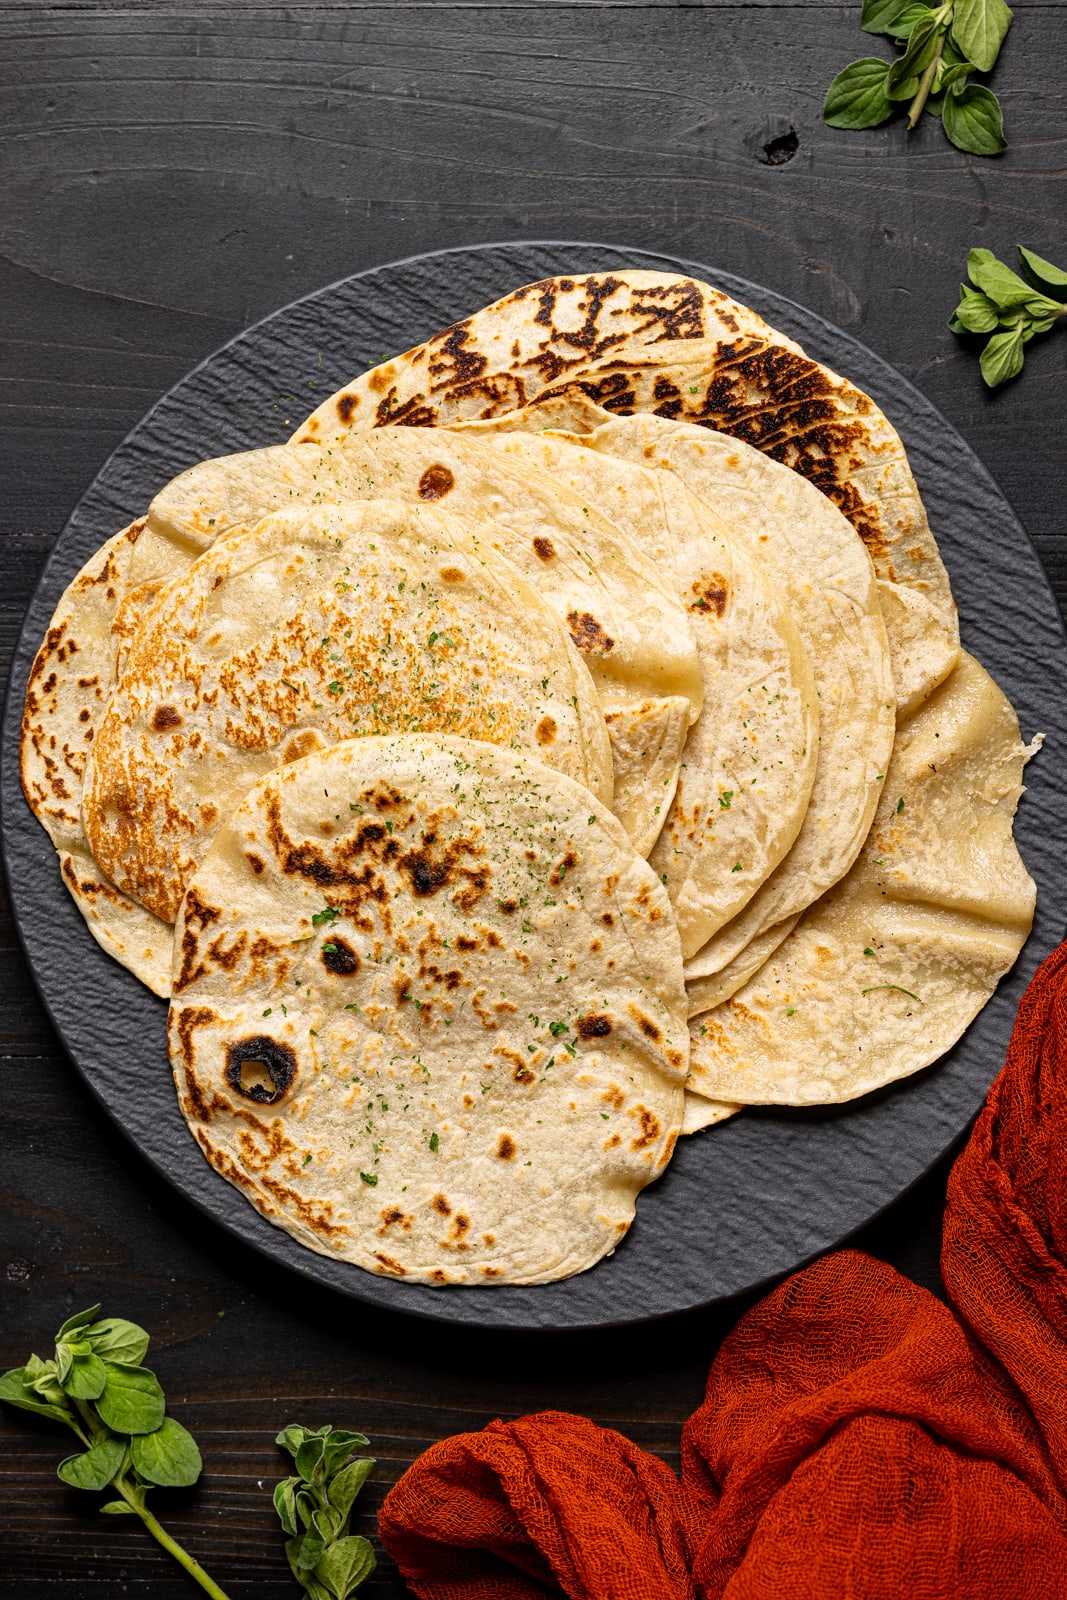 Tortillas on a black plate atop a black wood table.